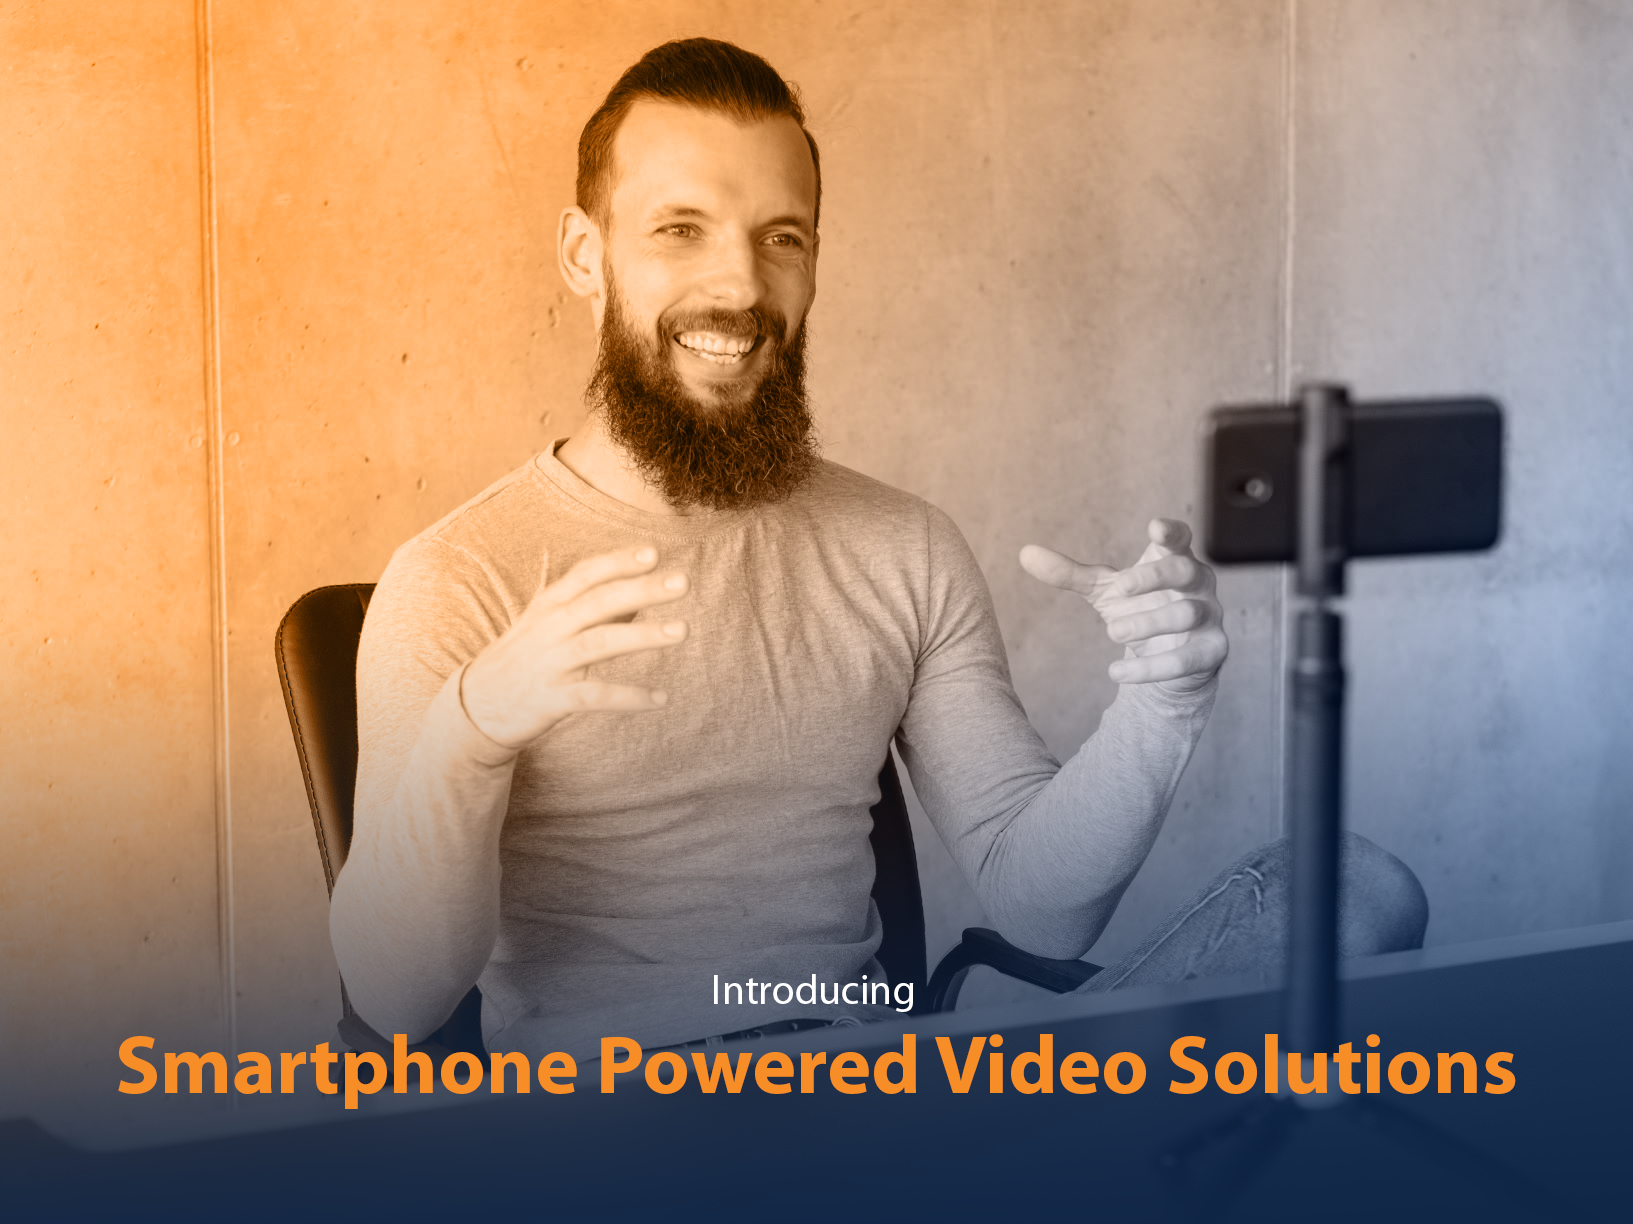 How Does Smartphone-Powered Video Production Work?